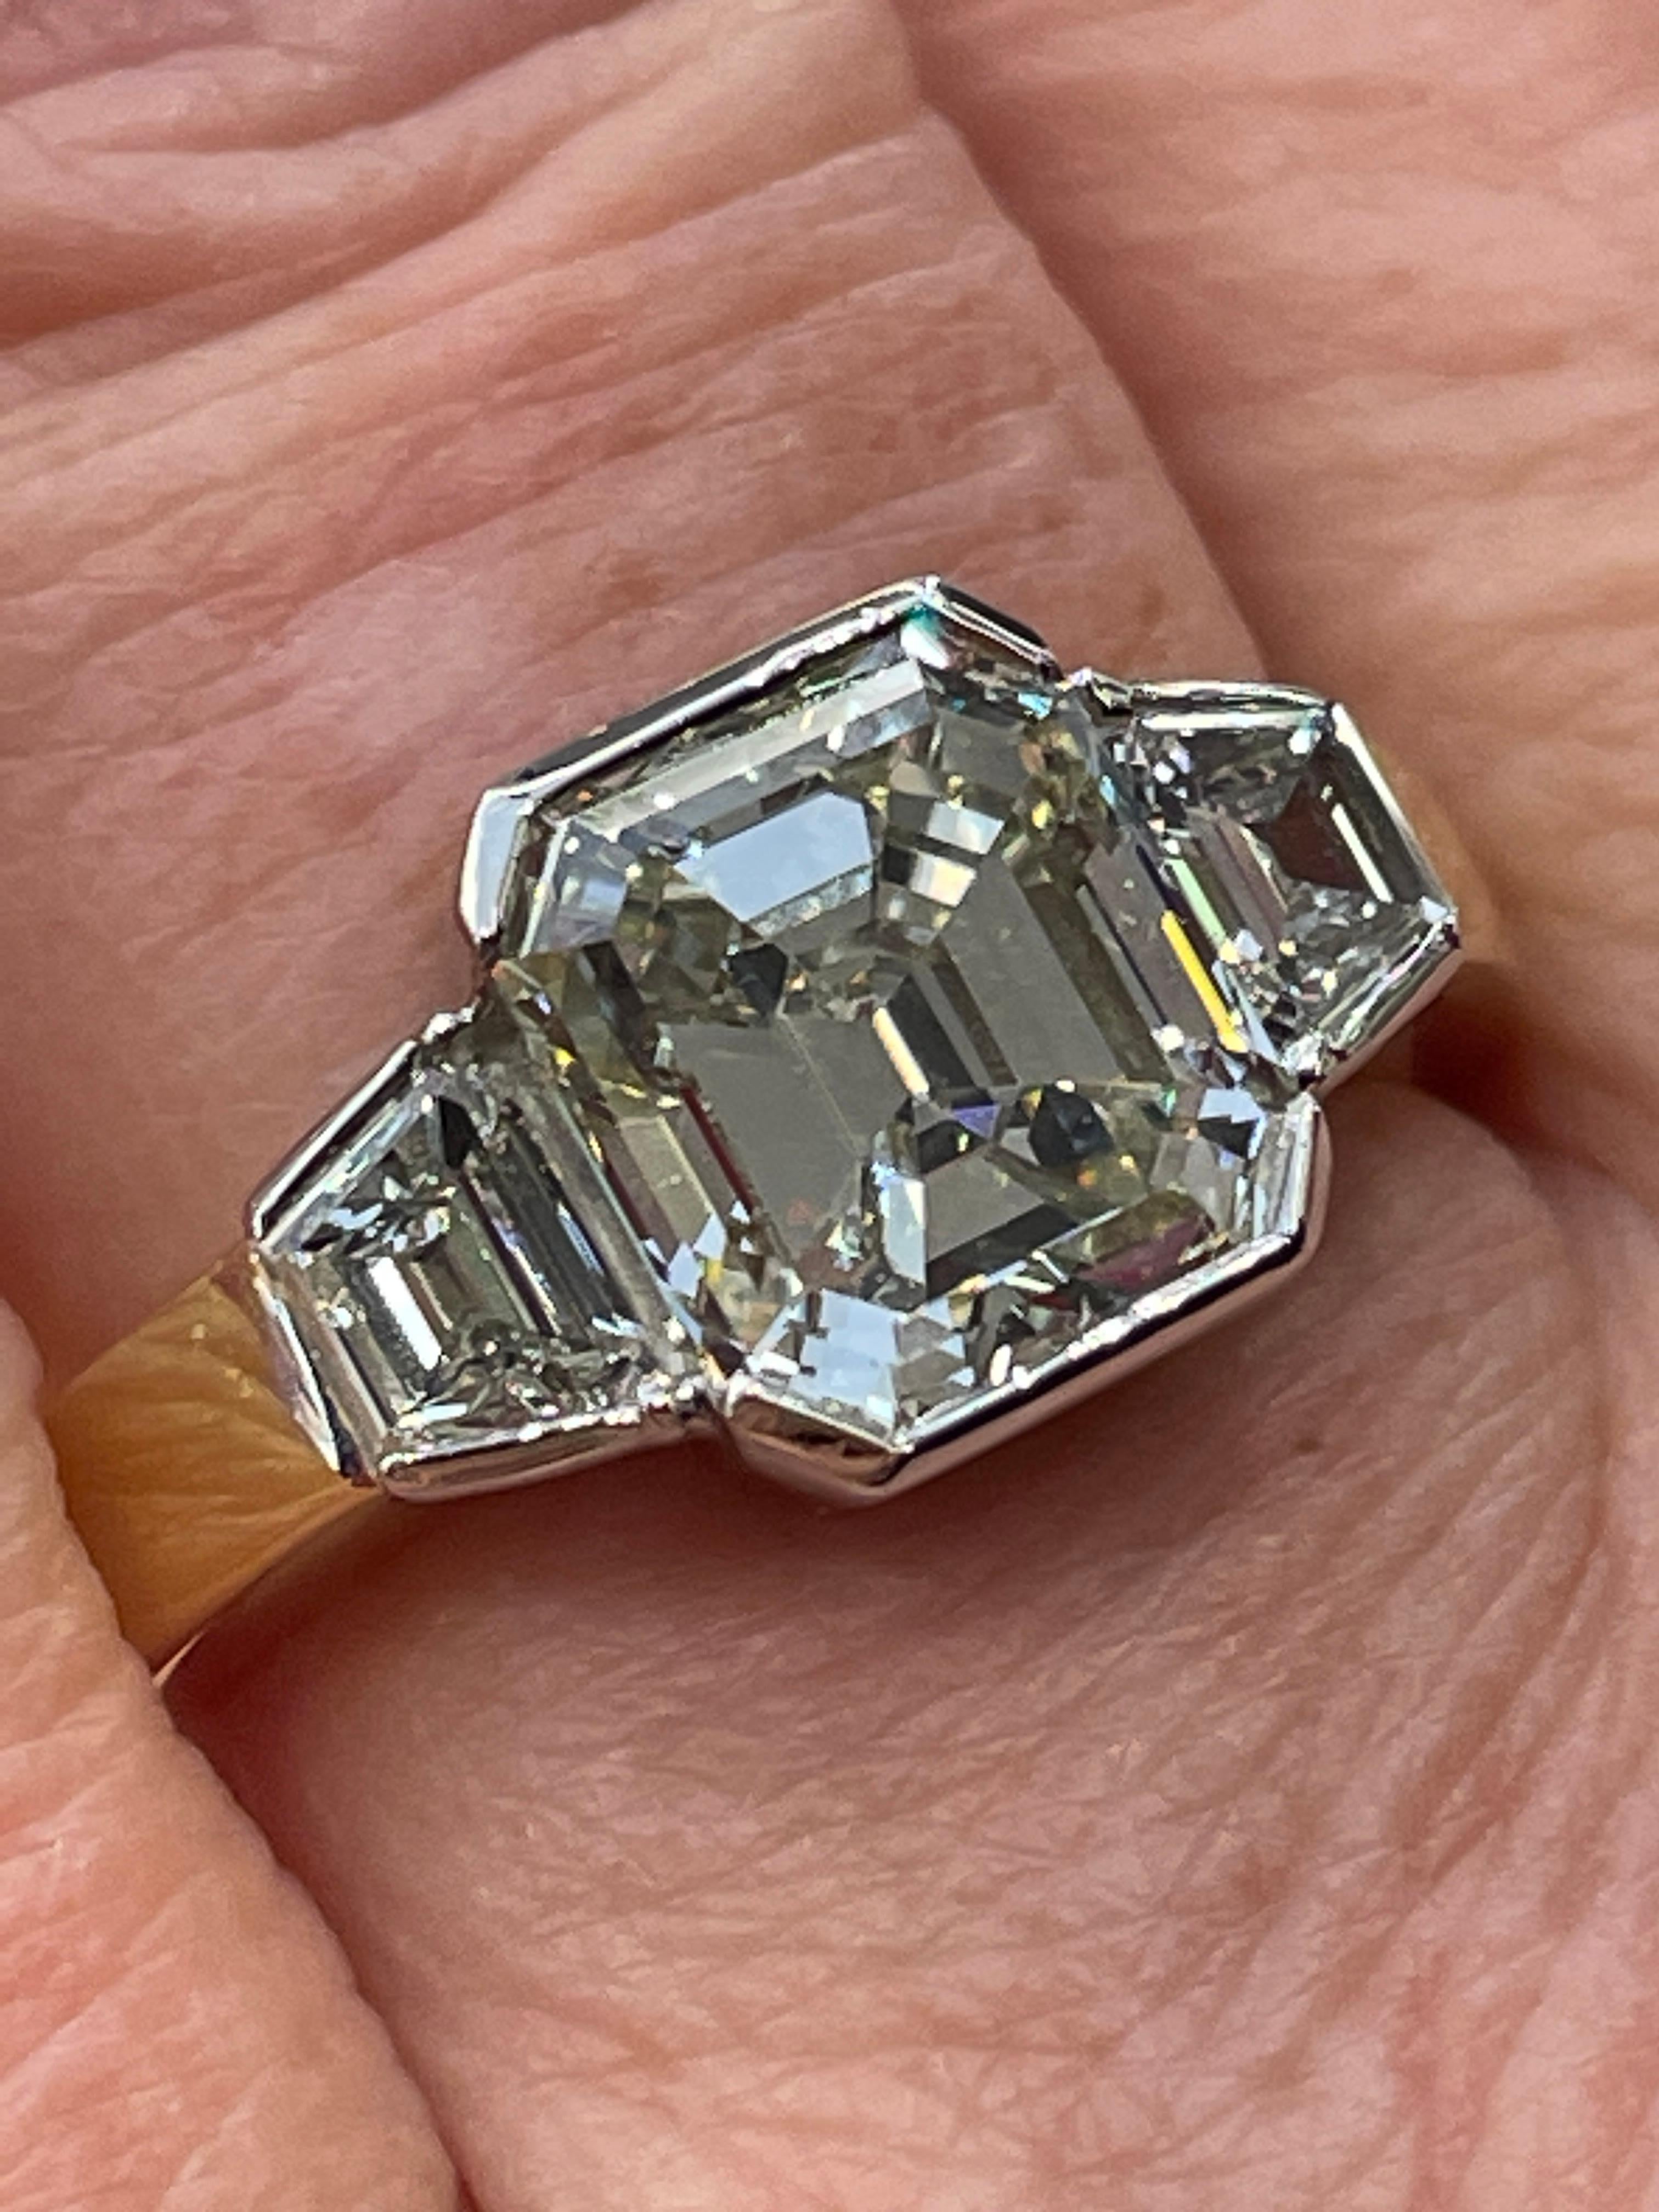 Breathtaking Estate HANDMADE PLATINUM and 18K Yellow Gold (stamped) Emerald Diamond  Three-Stone Engagement Ring.

All the Step cut Diamonds are Masterfully set into Platinum Bezel setting. The center Emerald Diamond is GIA Certified 3.04ct with